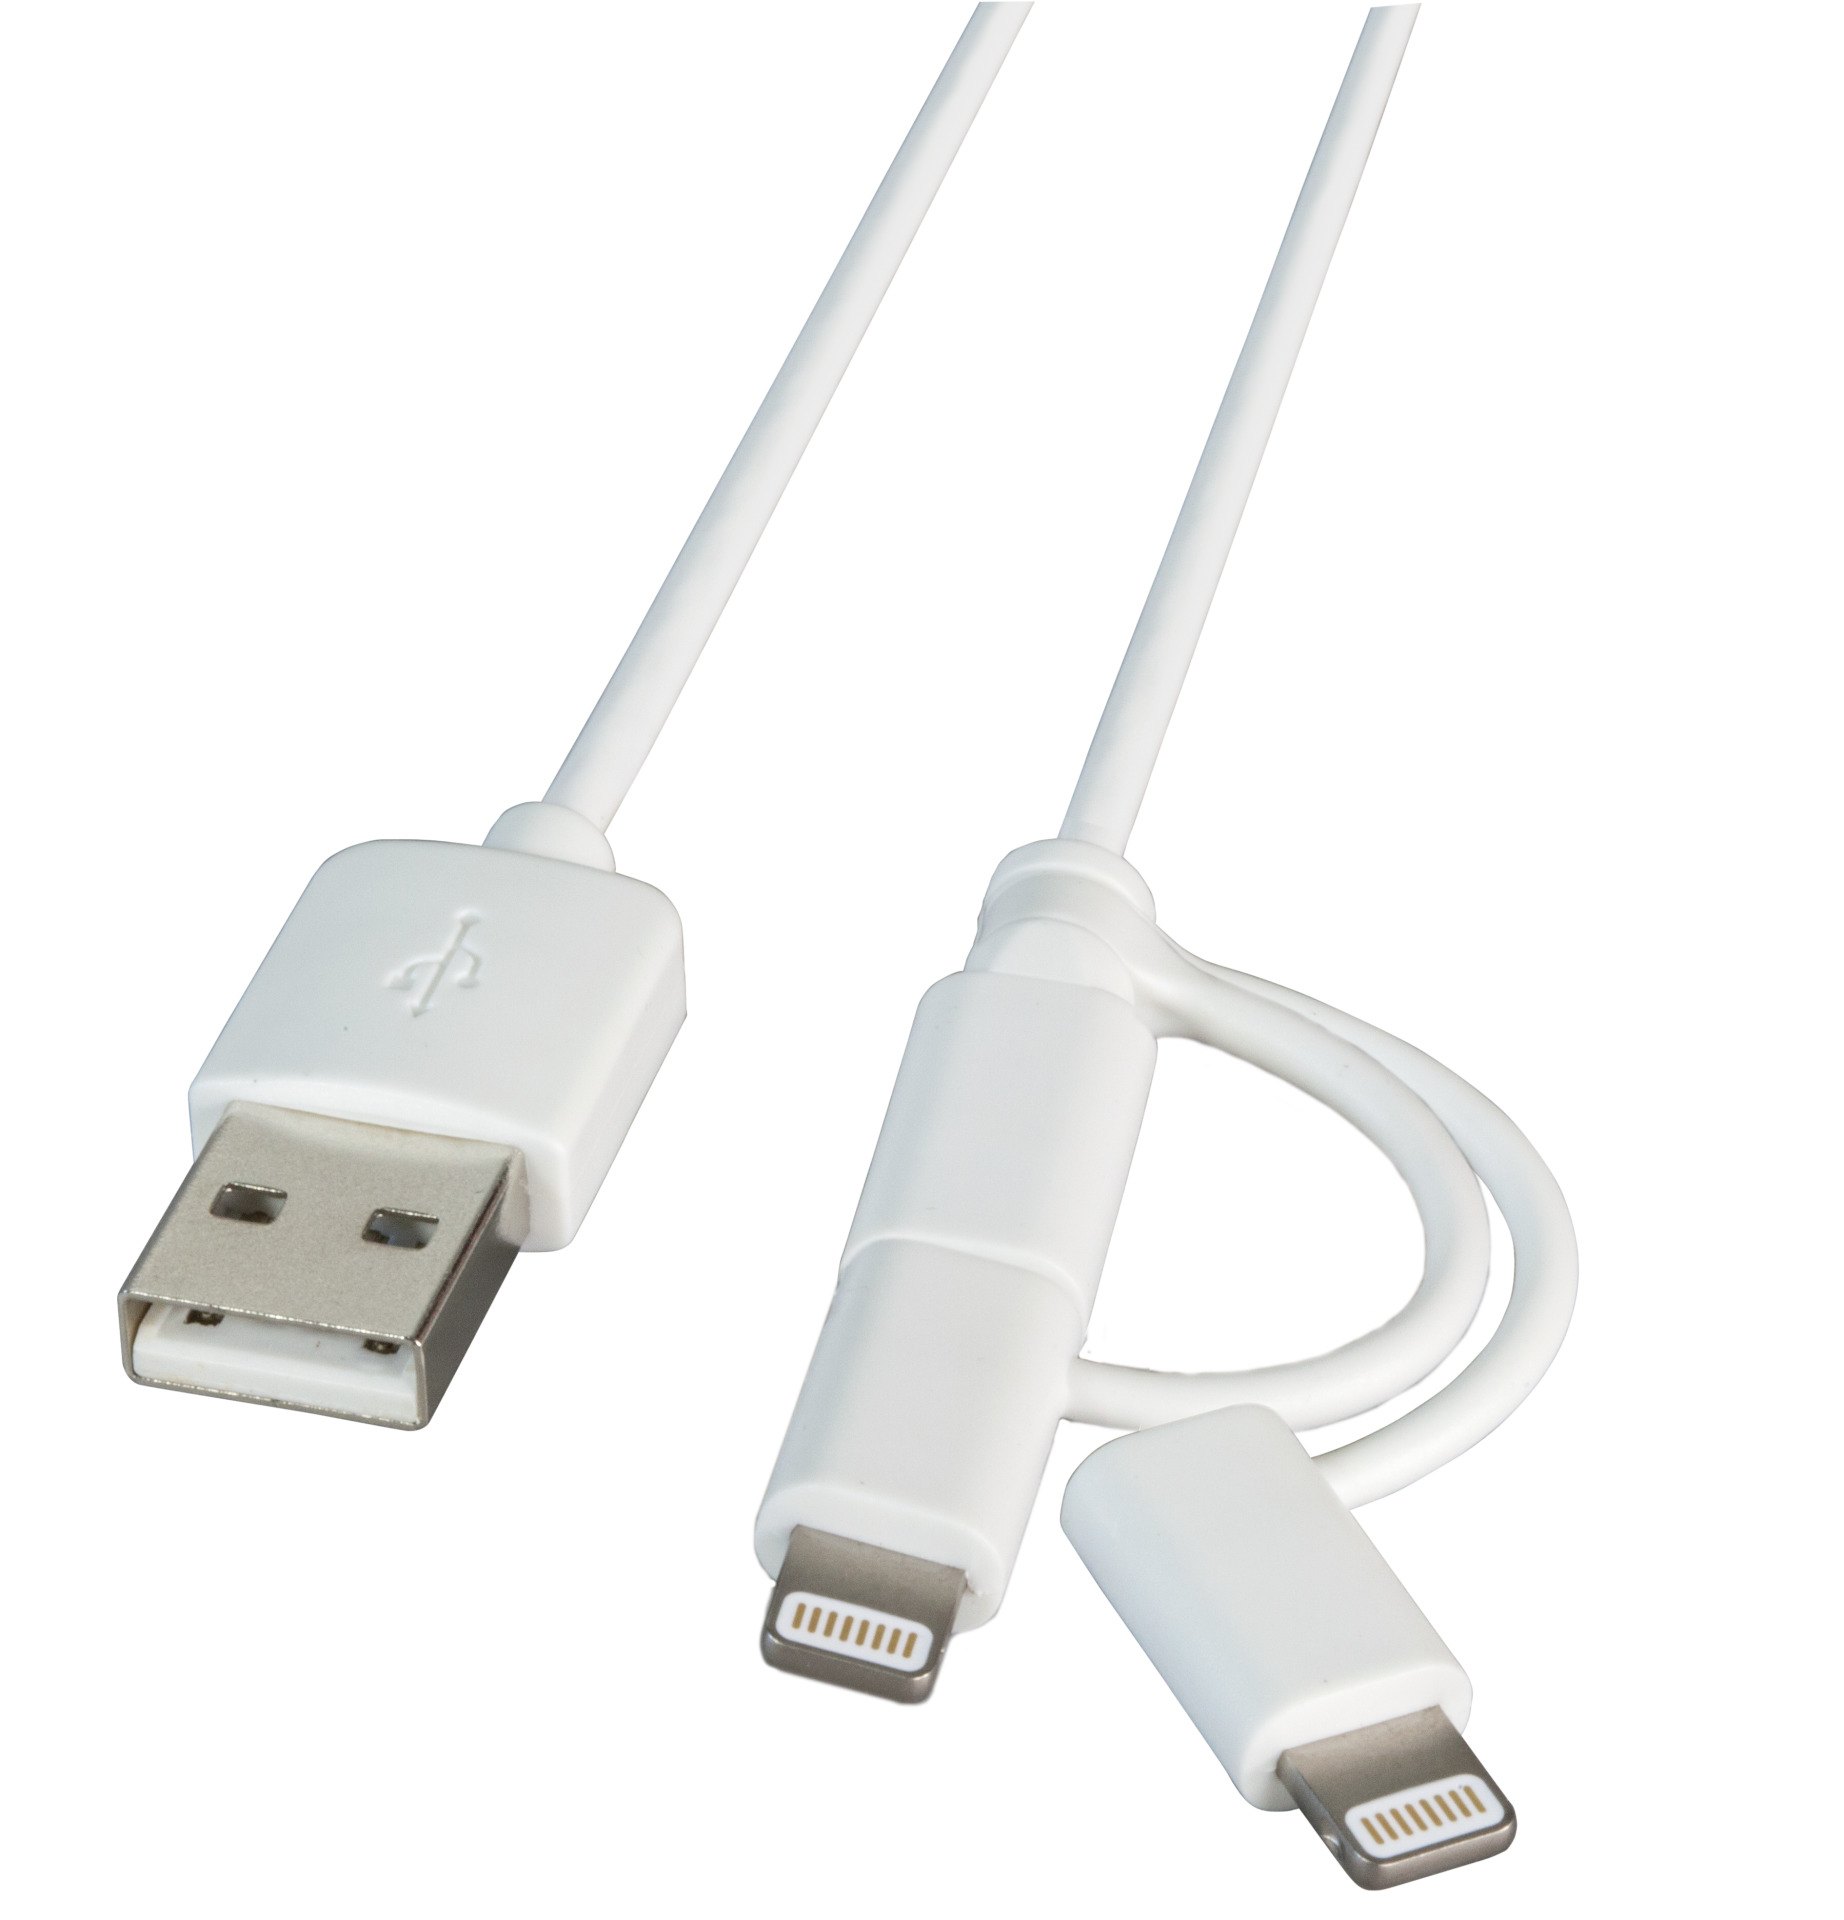 MFI USB2.0 Cable Type-A - 2 in 1 Plug- Micro-B / Lightning, 1.0m, white